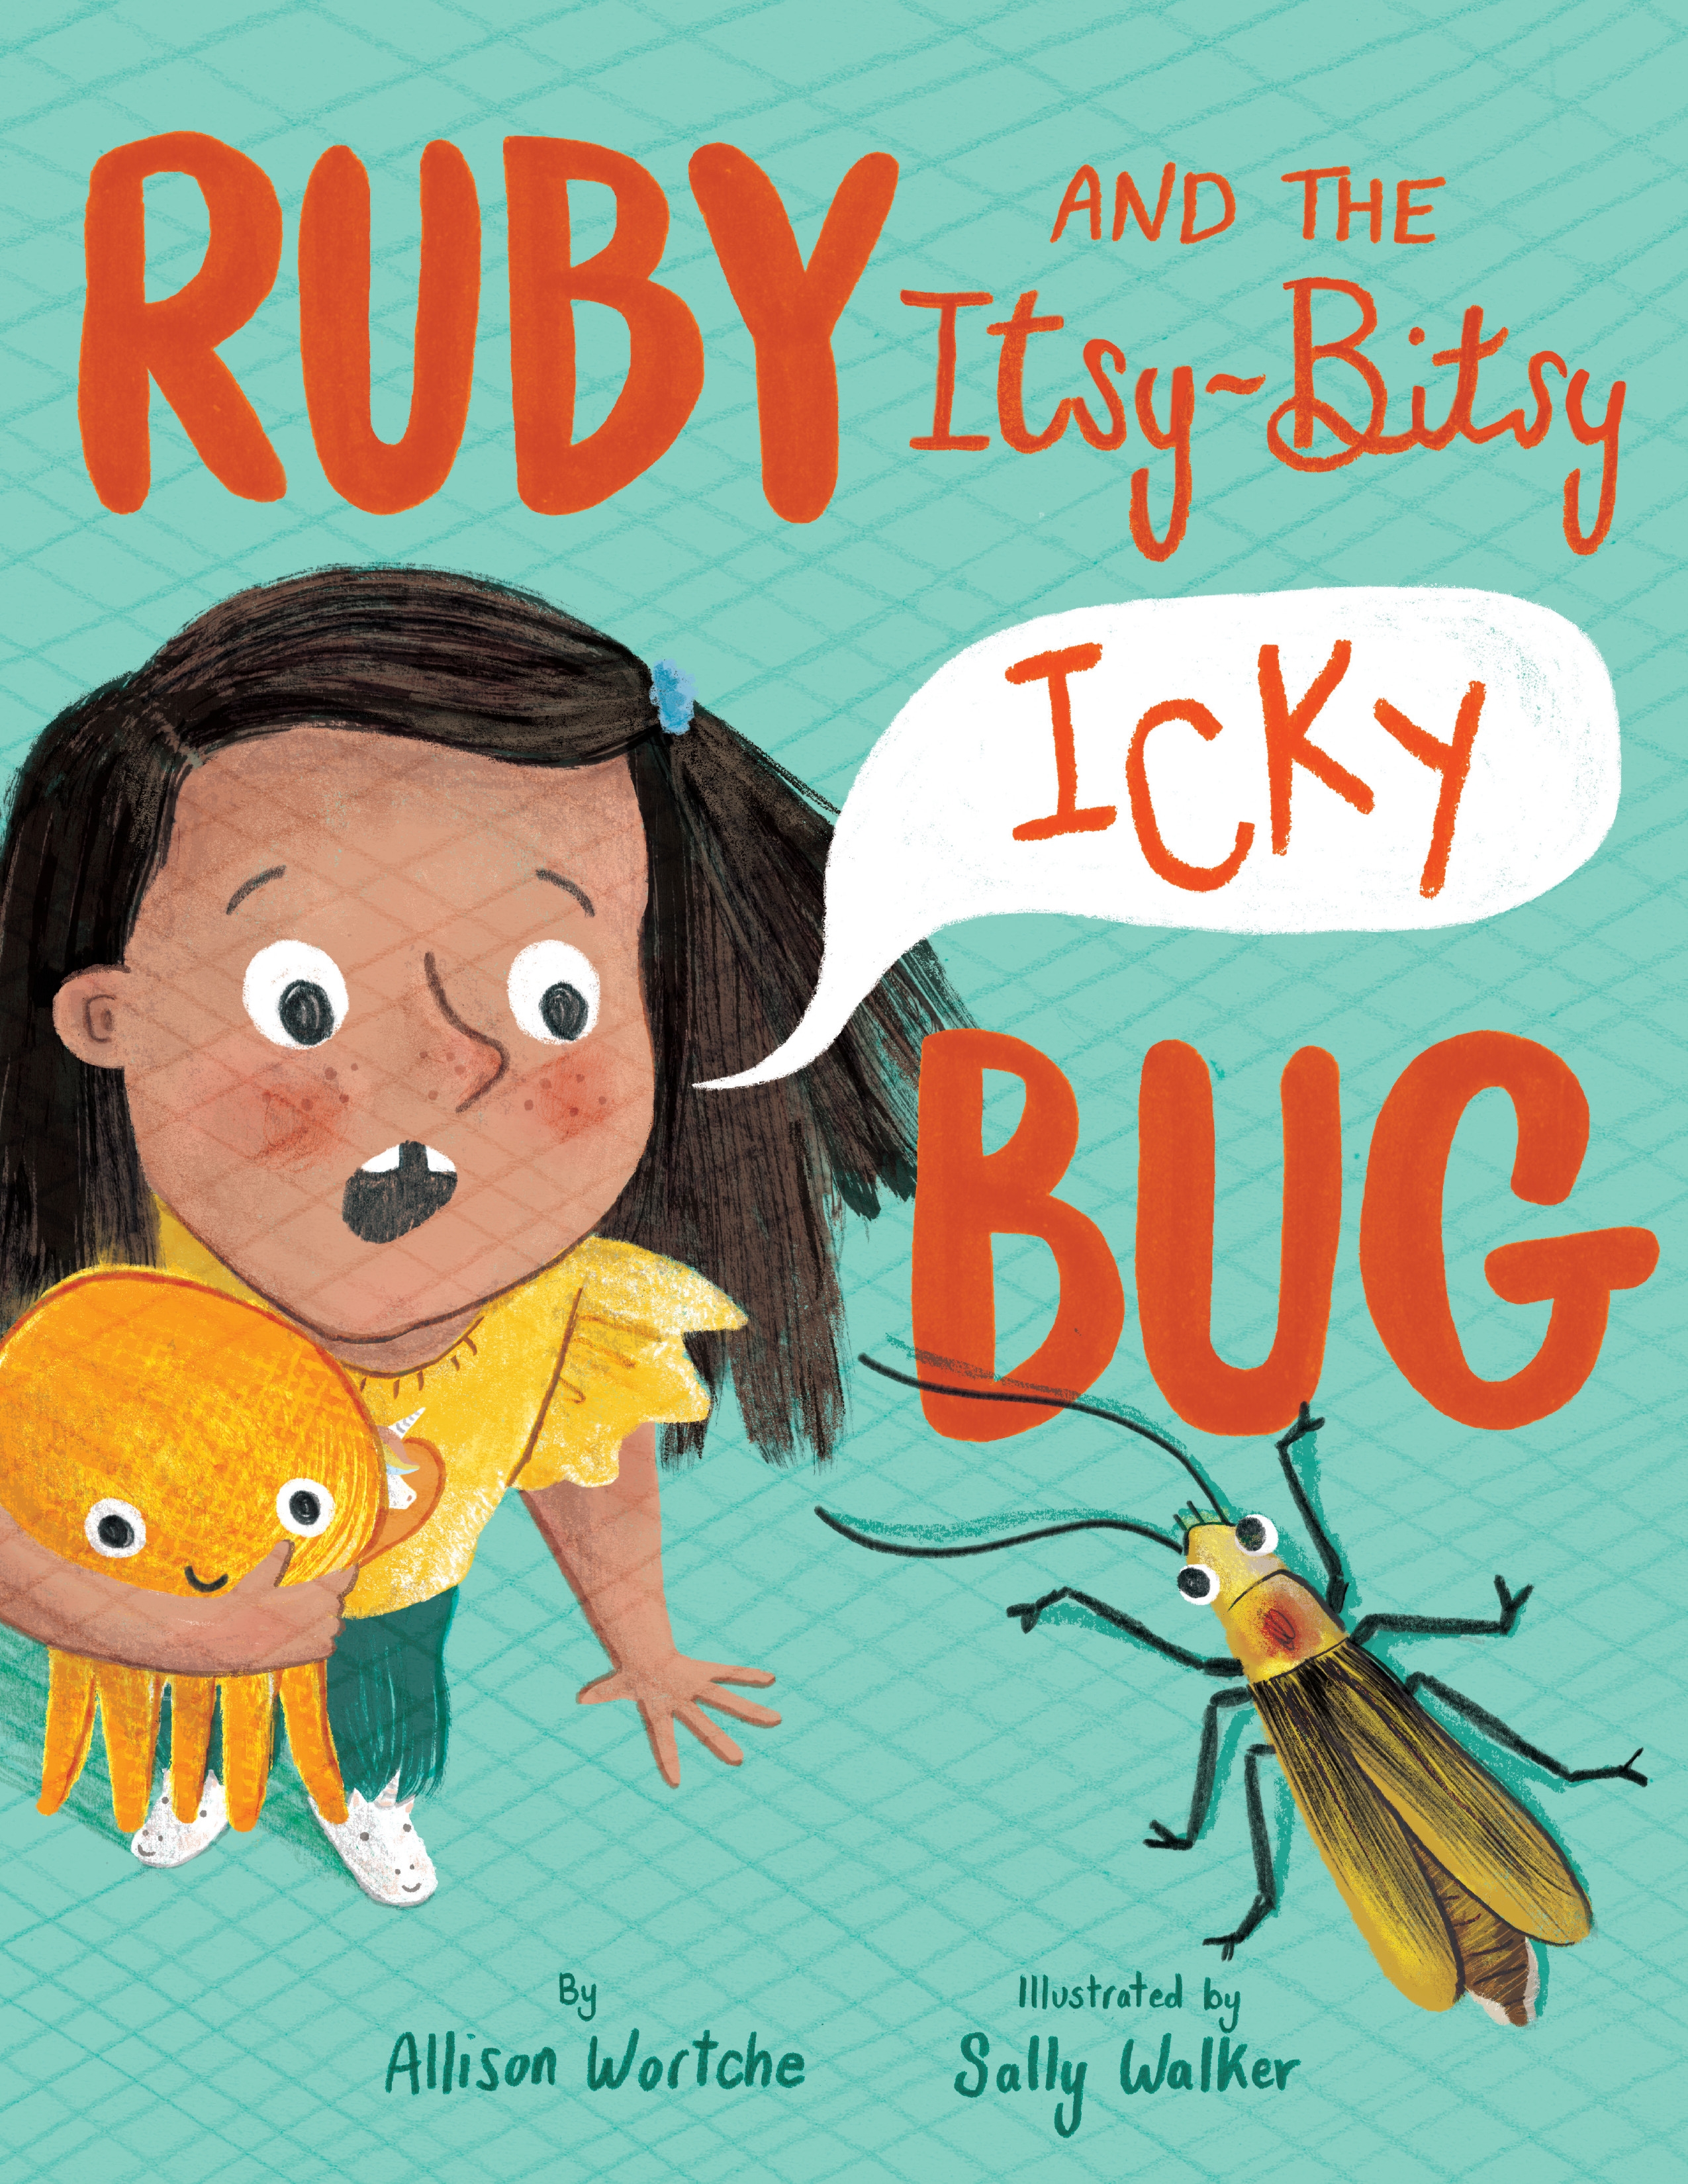 Ruby and the Itsy-Bitsy (Icky) Bug by Allison Wortche - Penguin Books New  Zealand